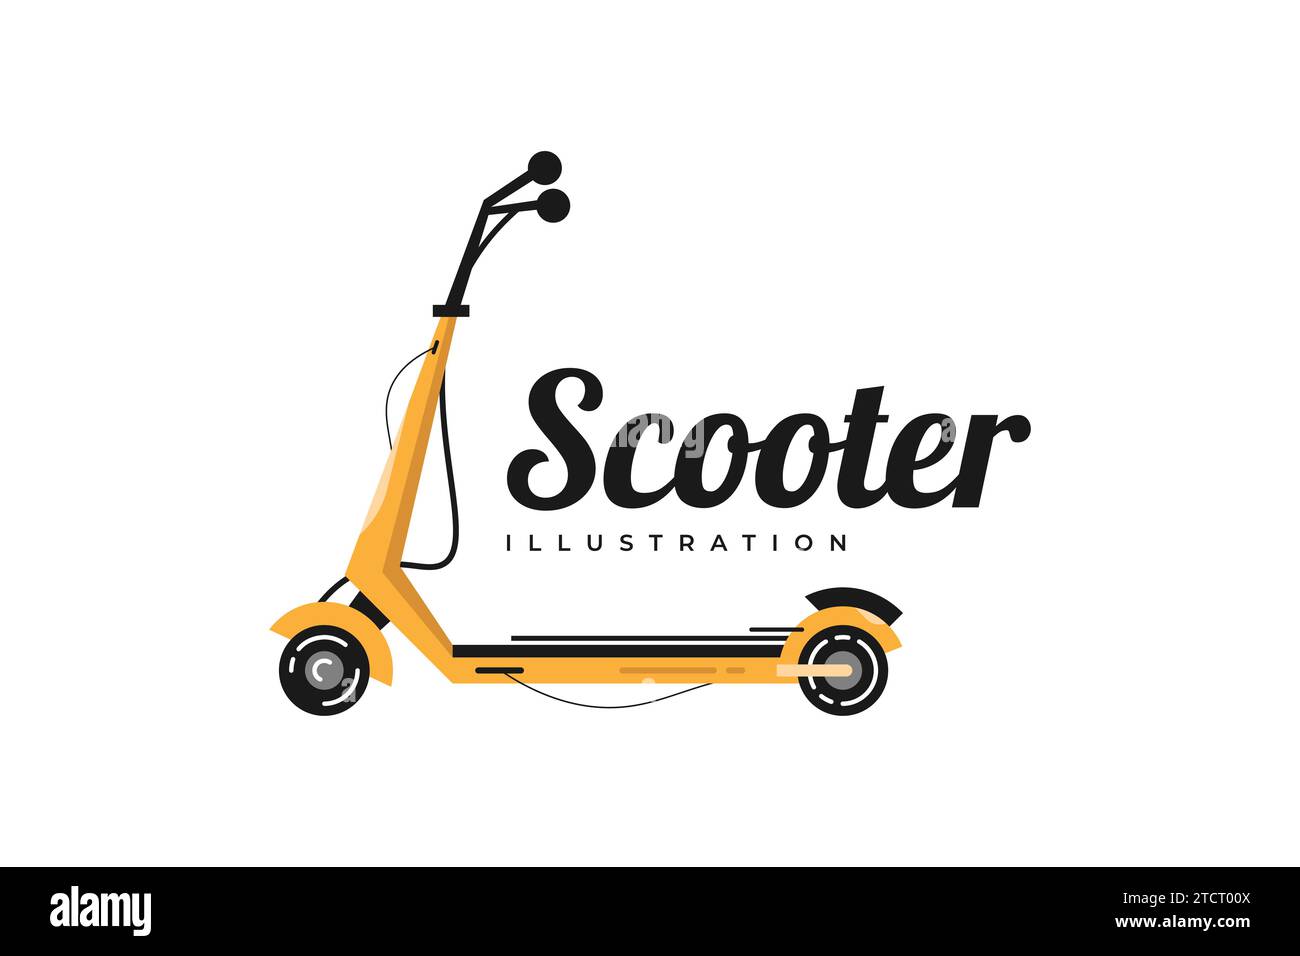 Electric Kick Scooter Vector Illustration. Scooter Icon Symbol Design Stock Vector